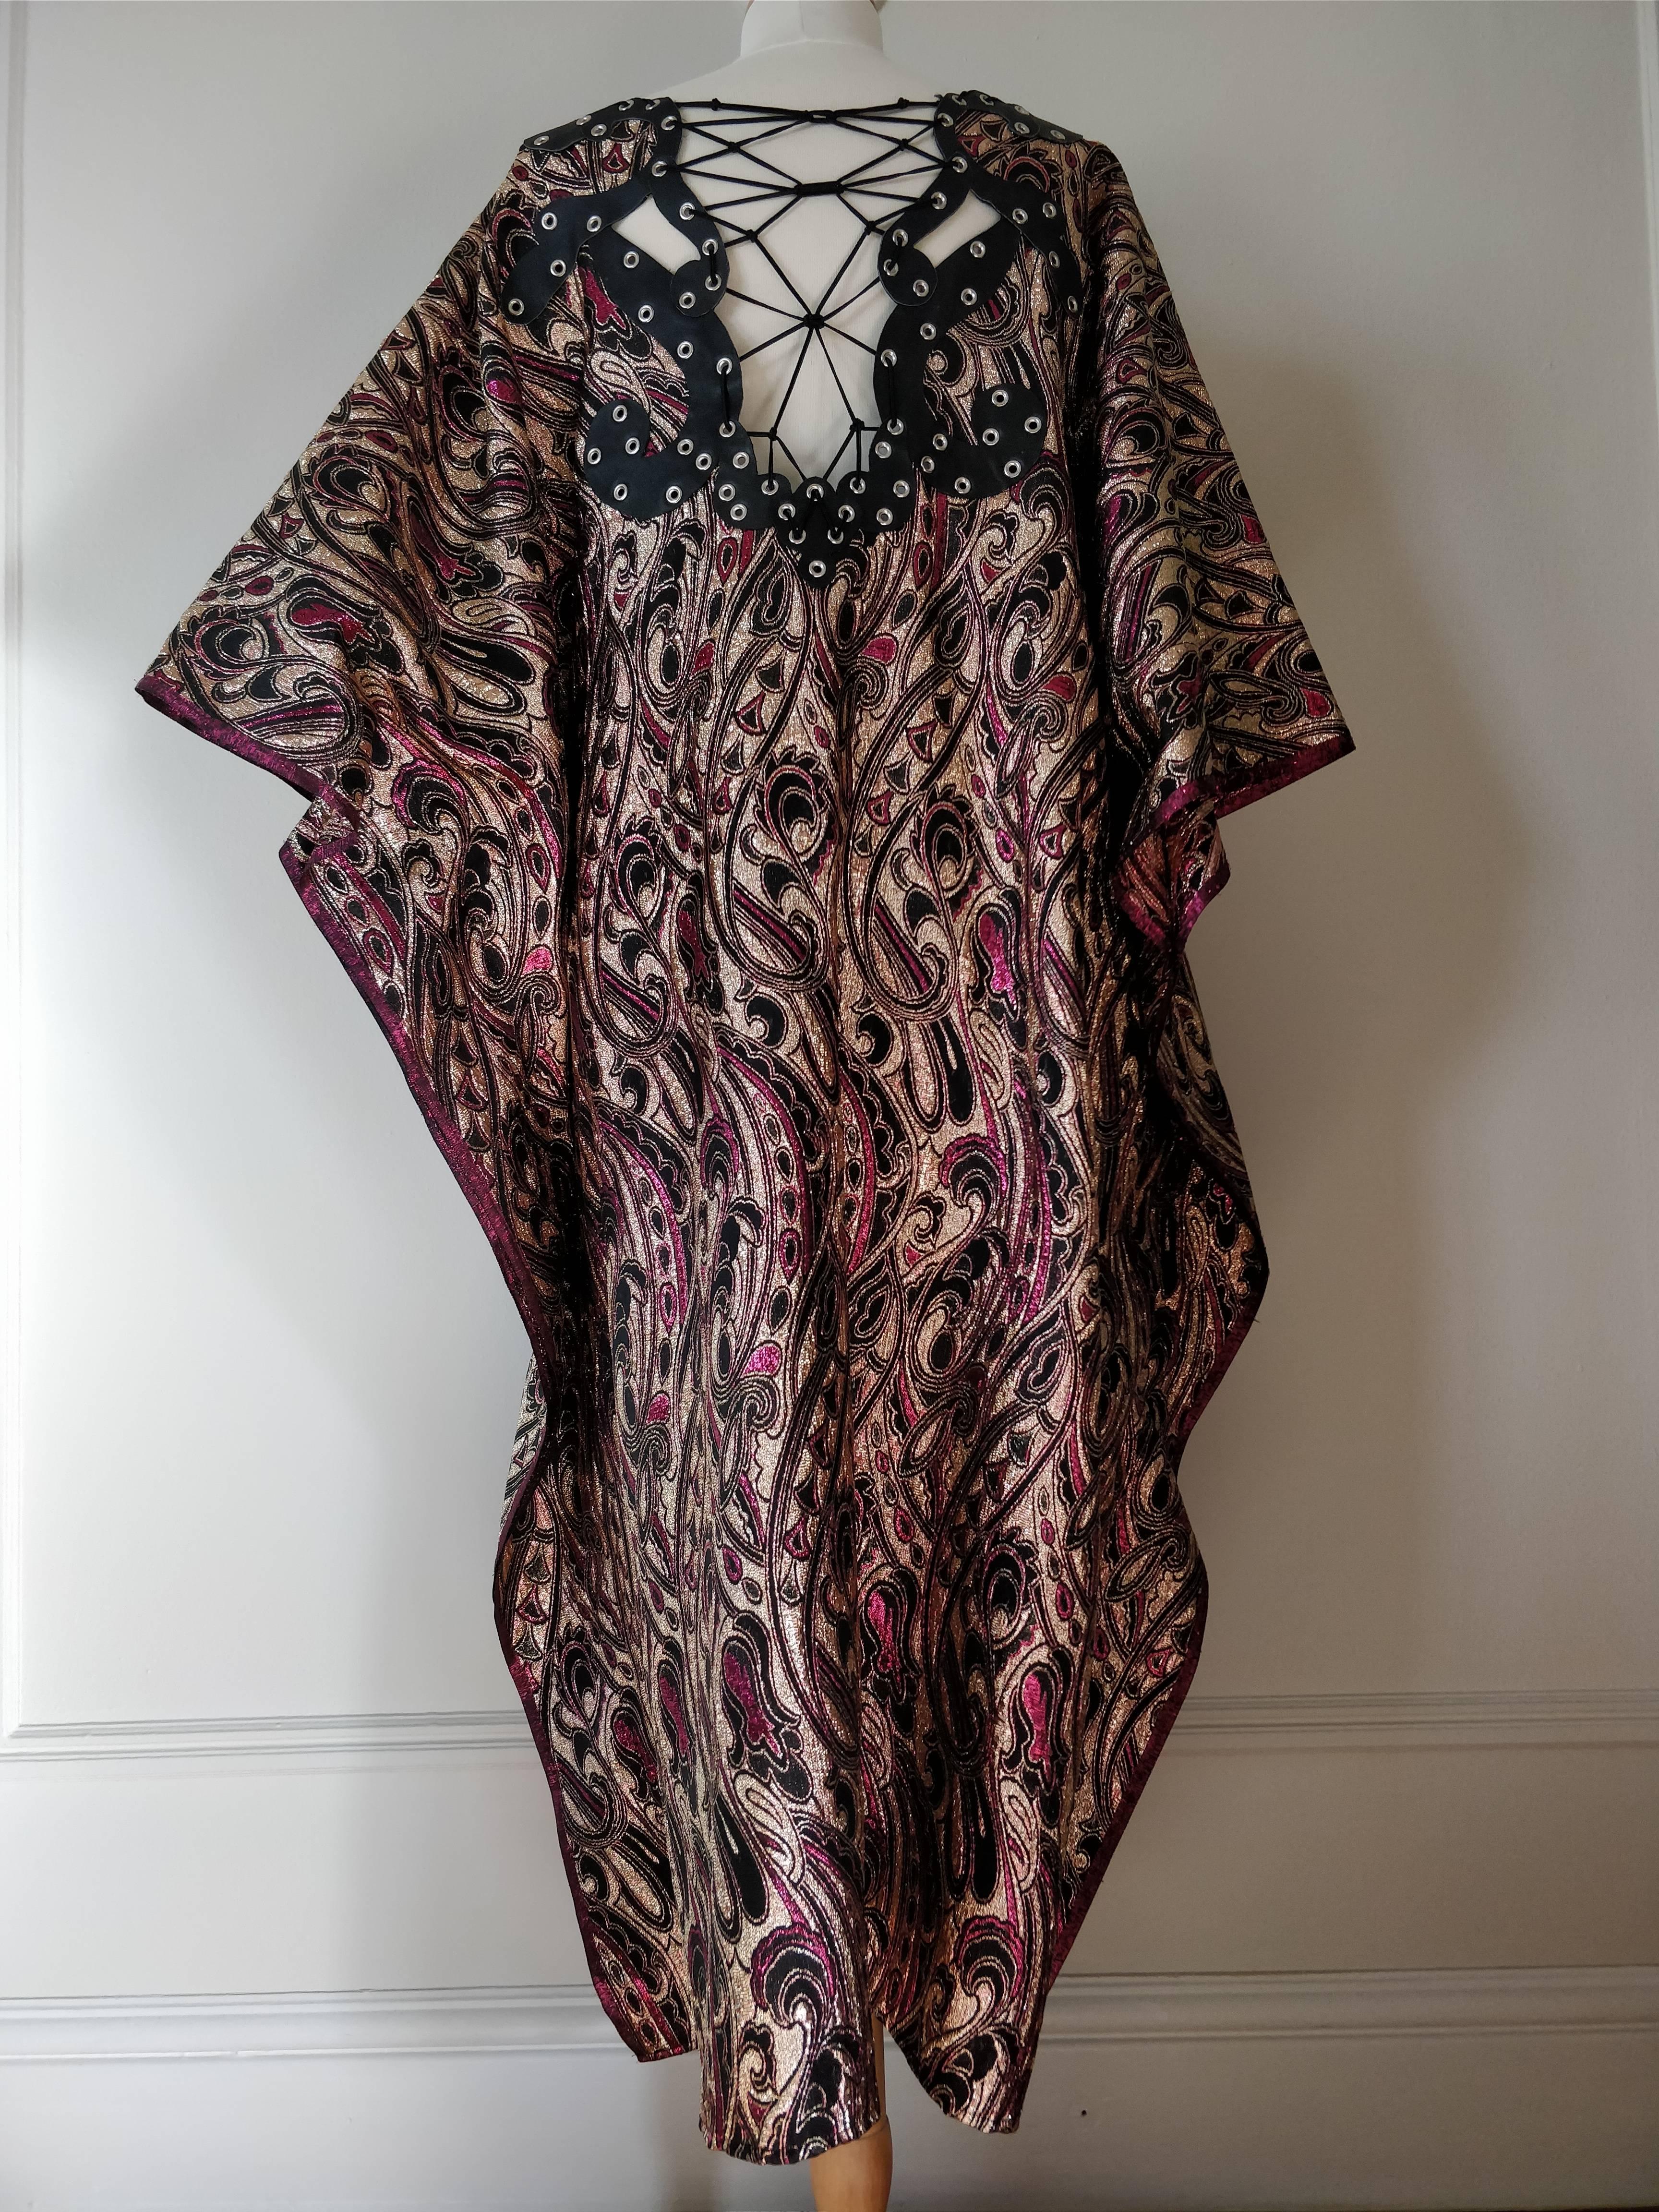 A custom-made vintage Indian paisley print lame caftan in burgundy and gold with hand-made leather applique, eyelets and lacing at neckline.  One size.